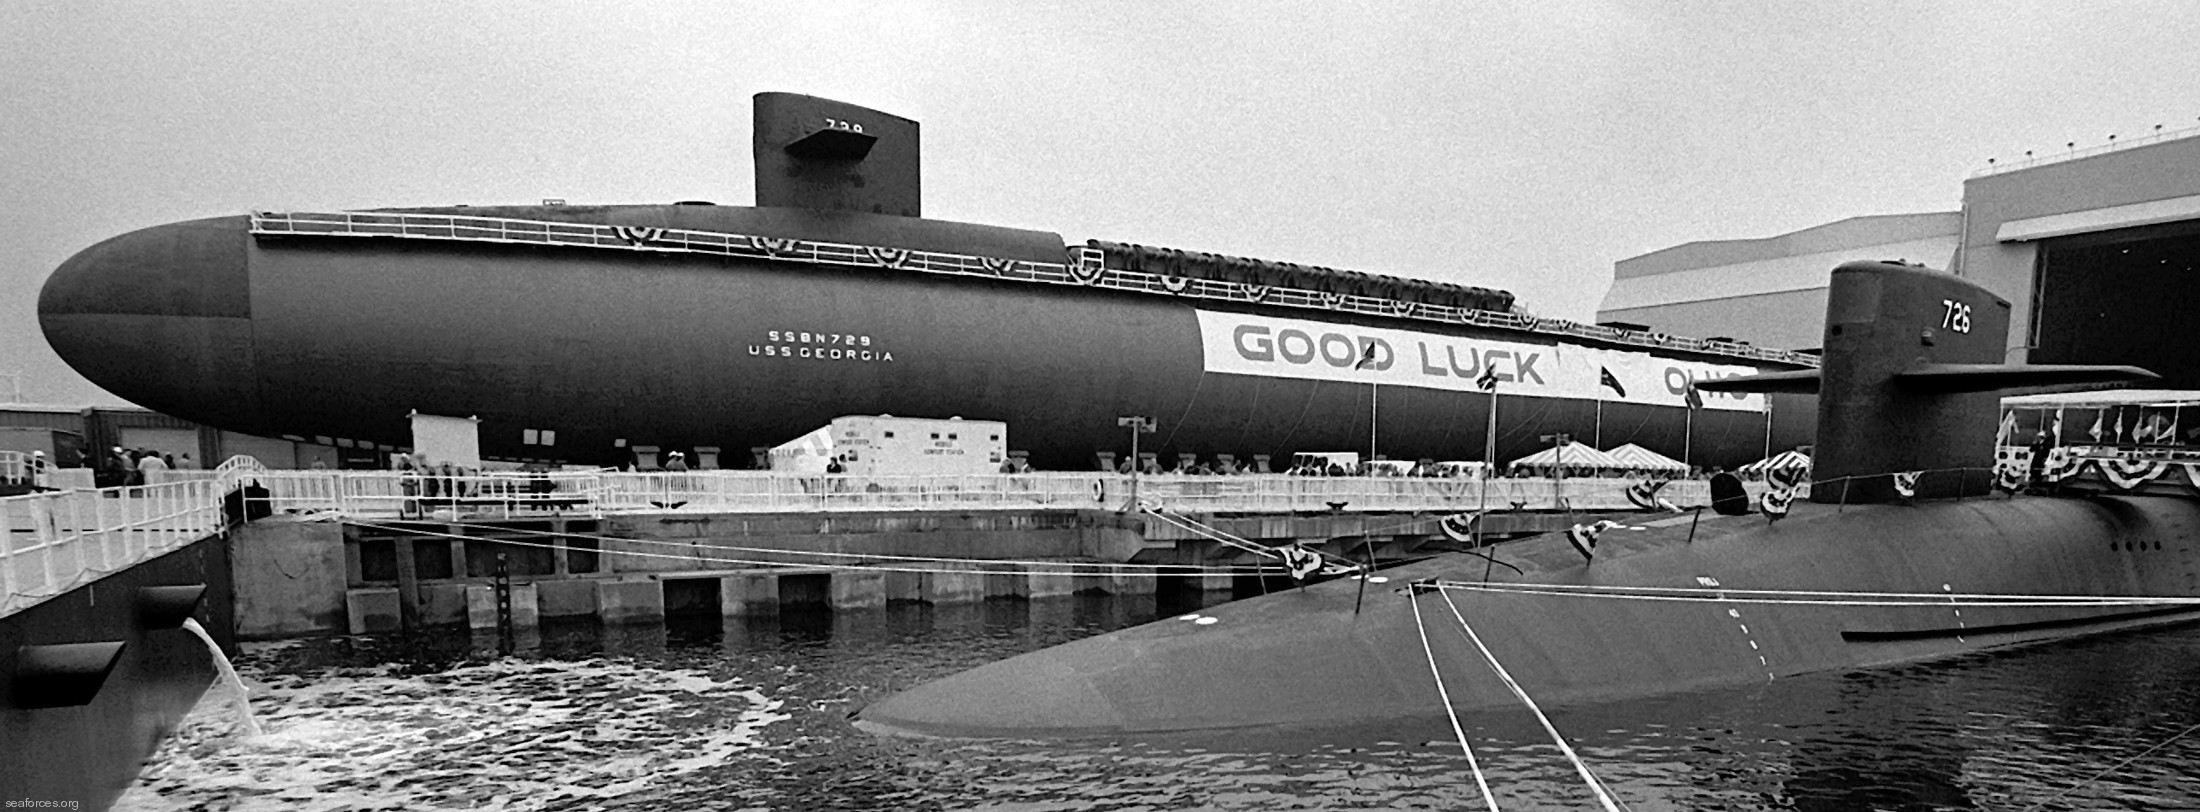 ssbn-729 uss georgia ballistic missile submarine 1981 63 construction outfitting general dynamics electric boat groton